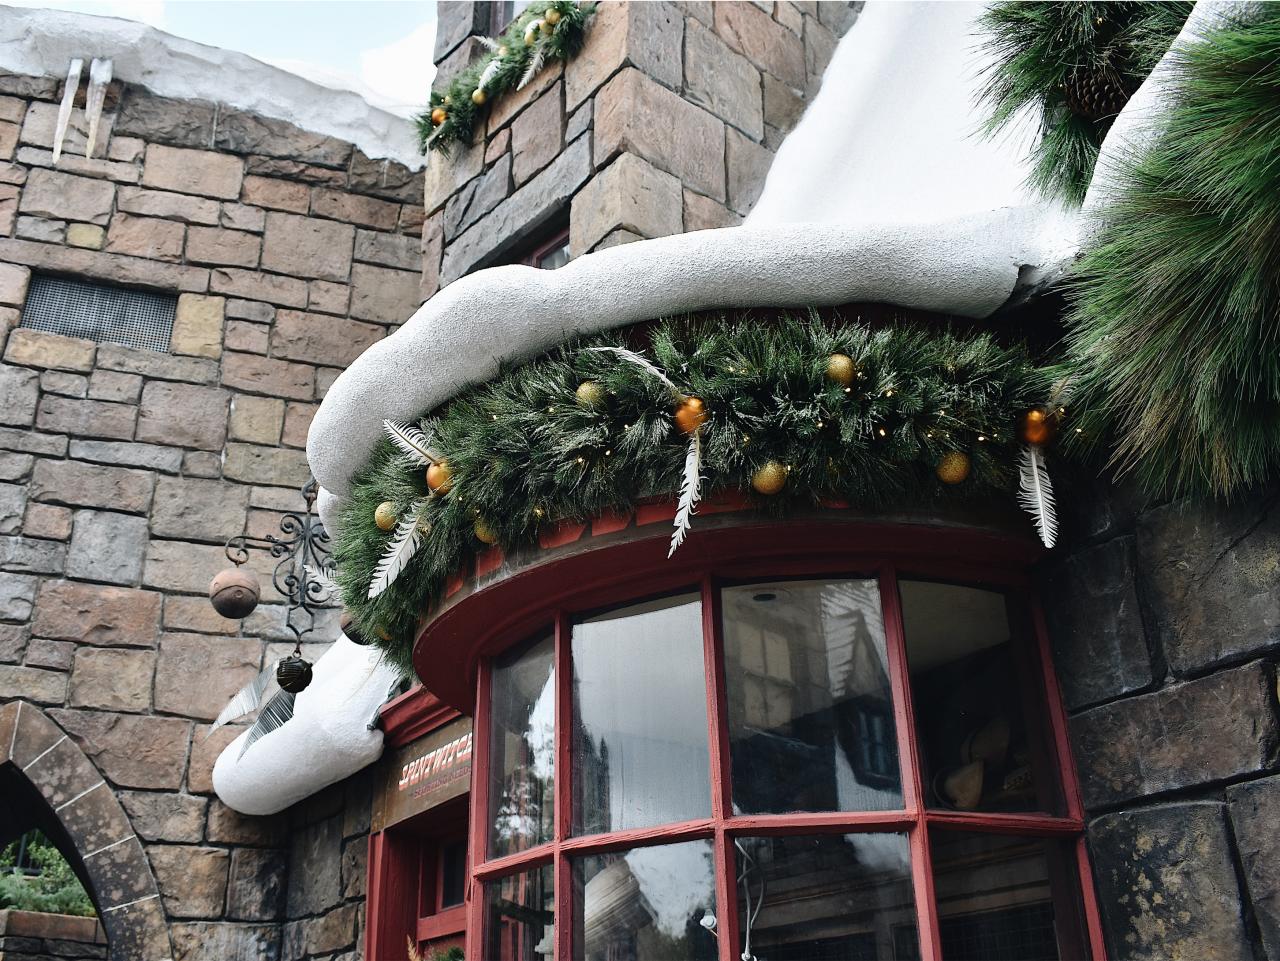 Christmas in The Wizarding World of Harry Potter - L.A. Parent